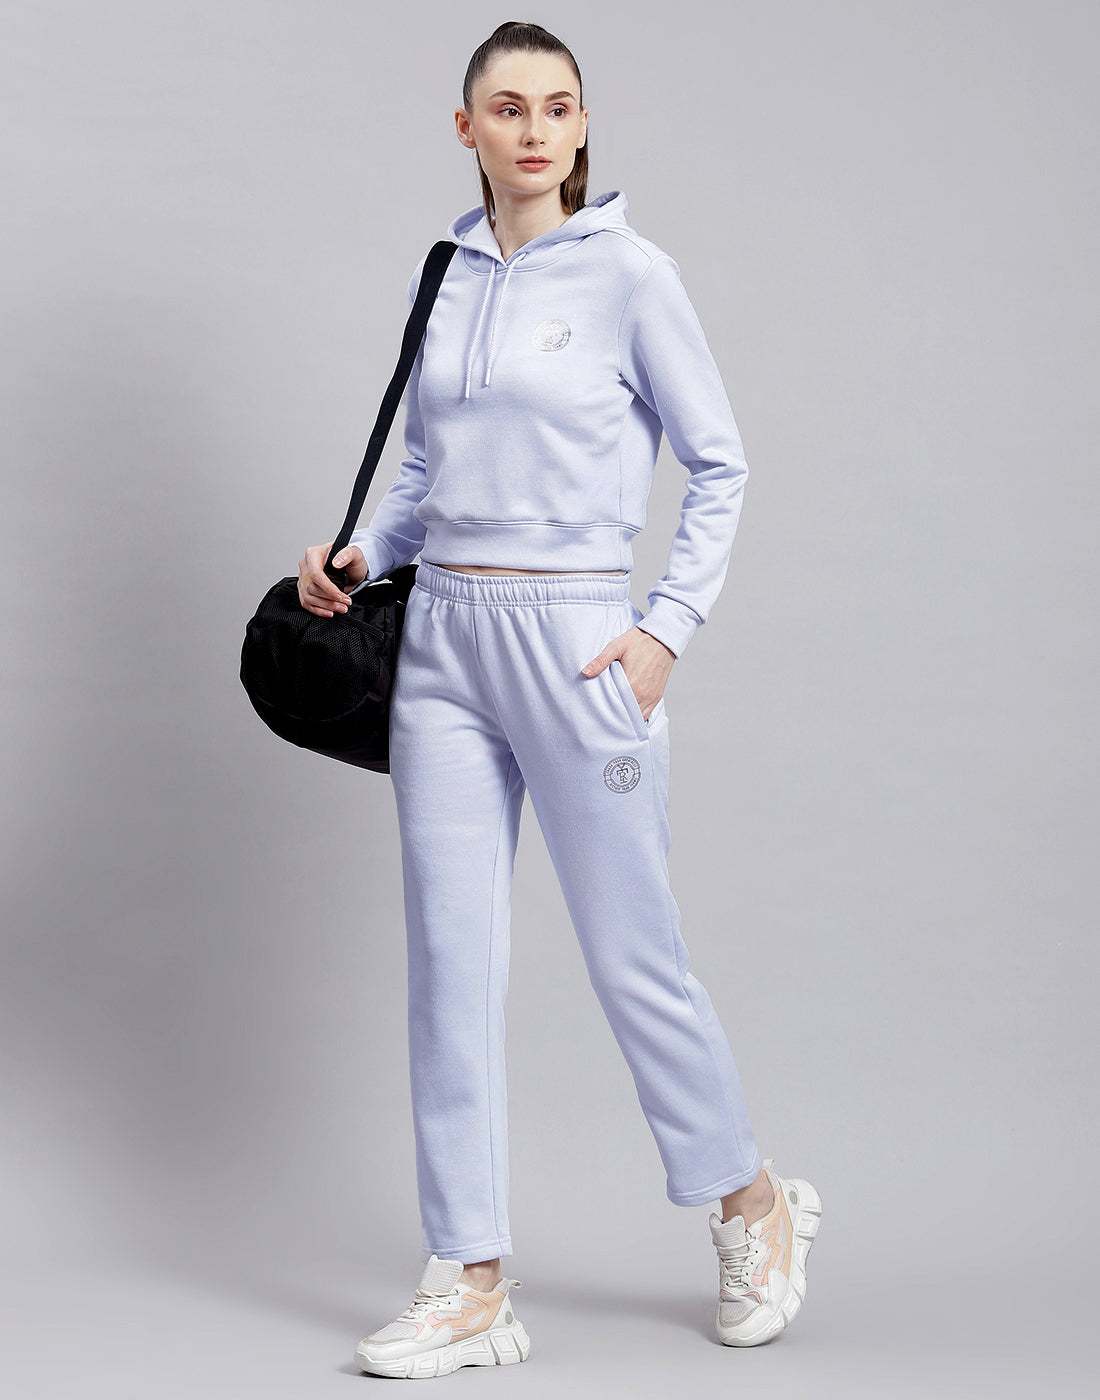 Buy Bombshell Women Sports Track Suit Set 100% PolyCotton Zipper Grey at  Amazon.in